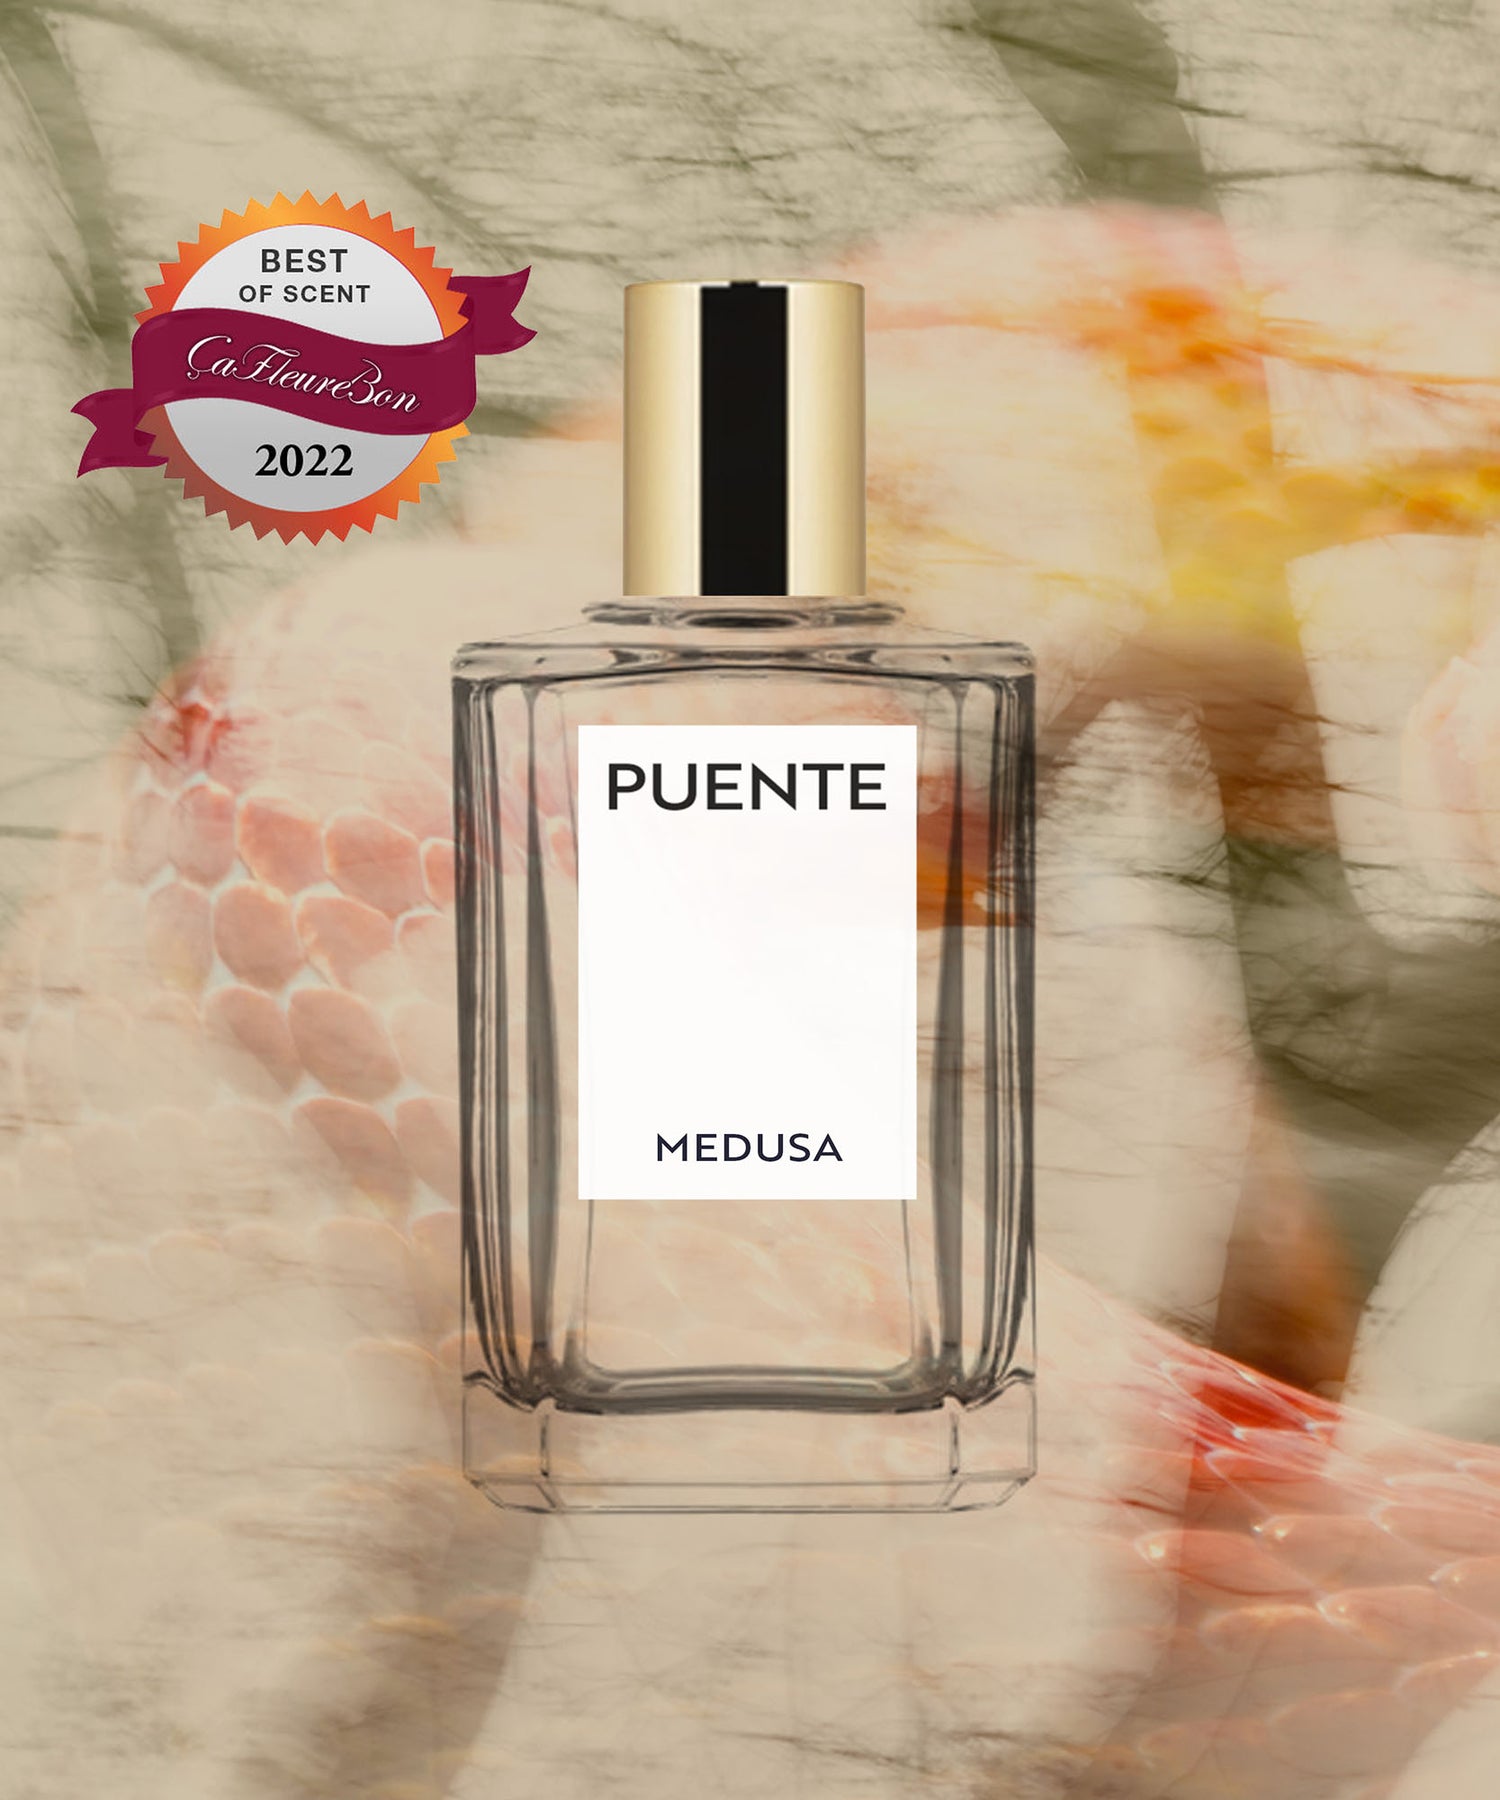 Luxury Perfumes: Shop the Finest Perfumes Online